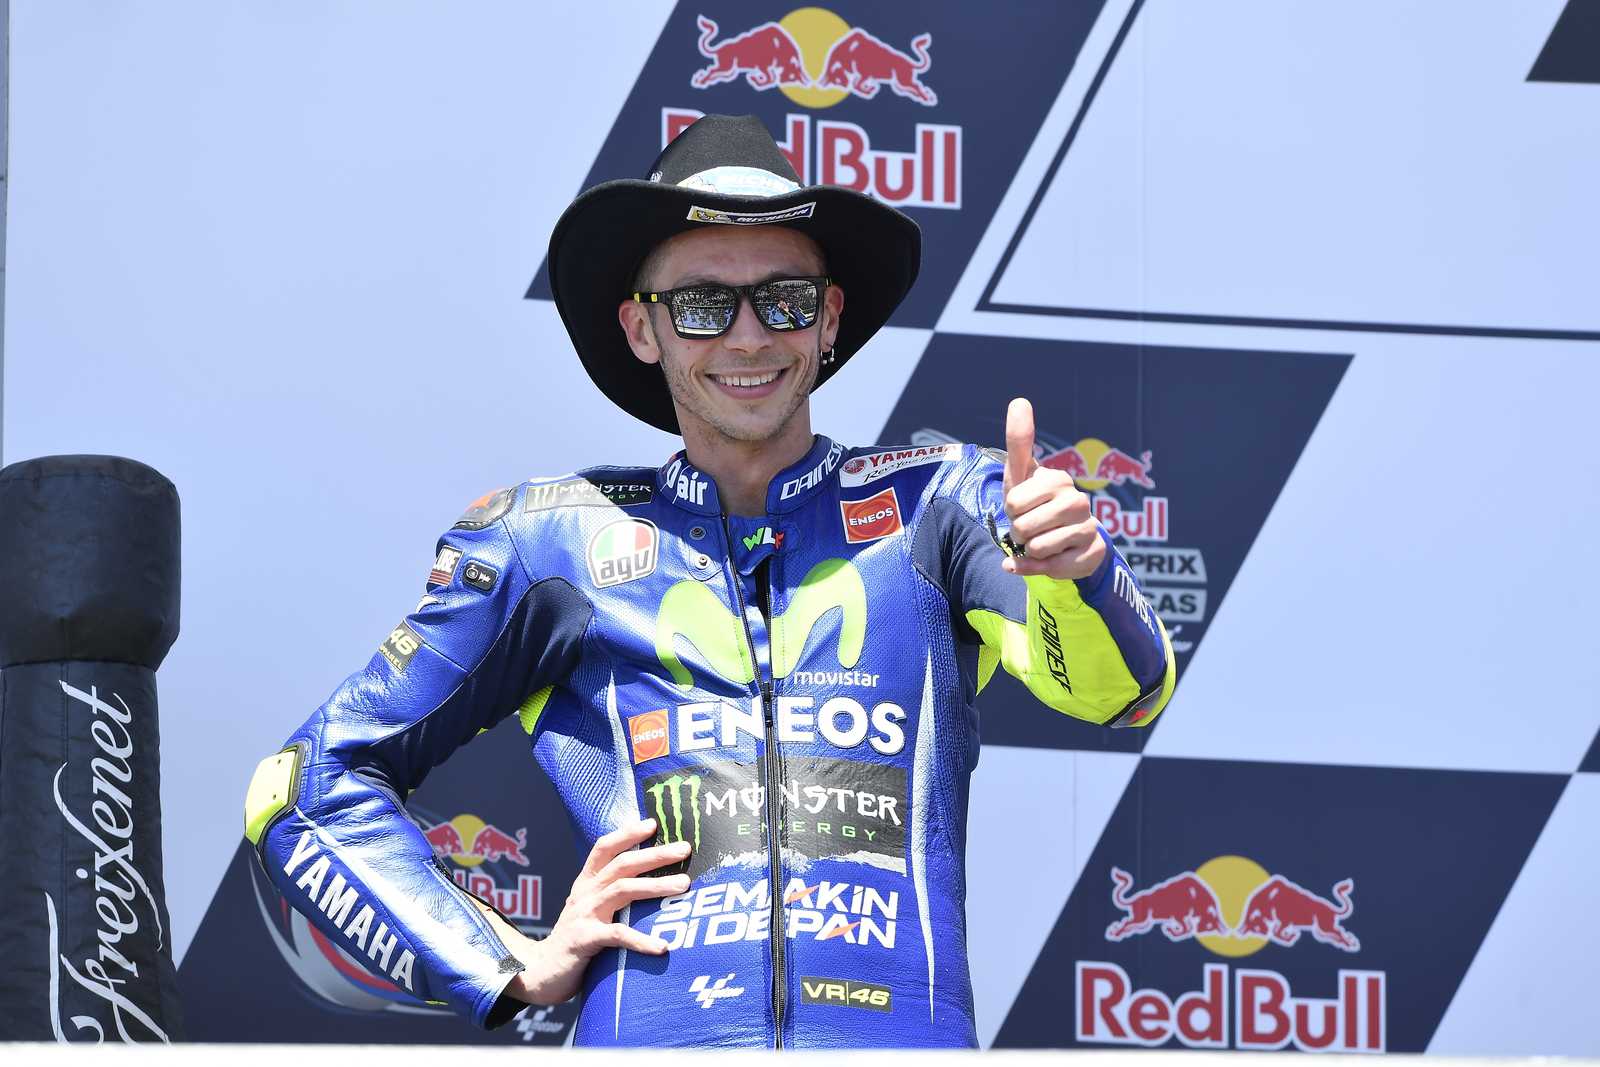 MotoGP: Rossi Declared Fit To Ride At Mugello - Roadracing World Magazine | Motorcycle Riding, Racing & Tech News